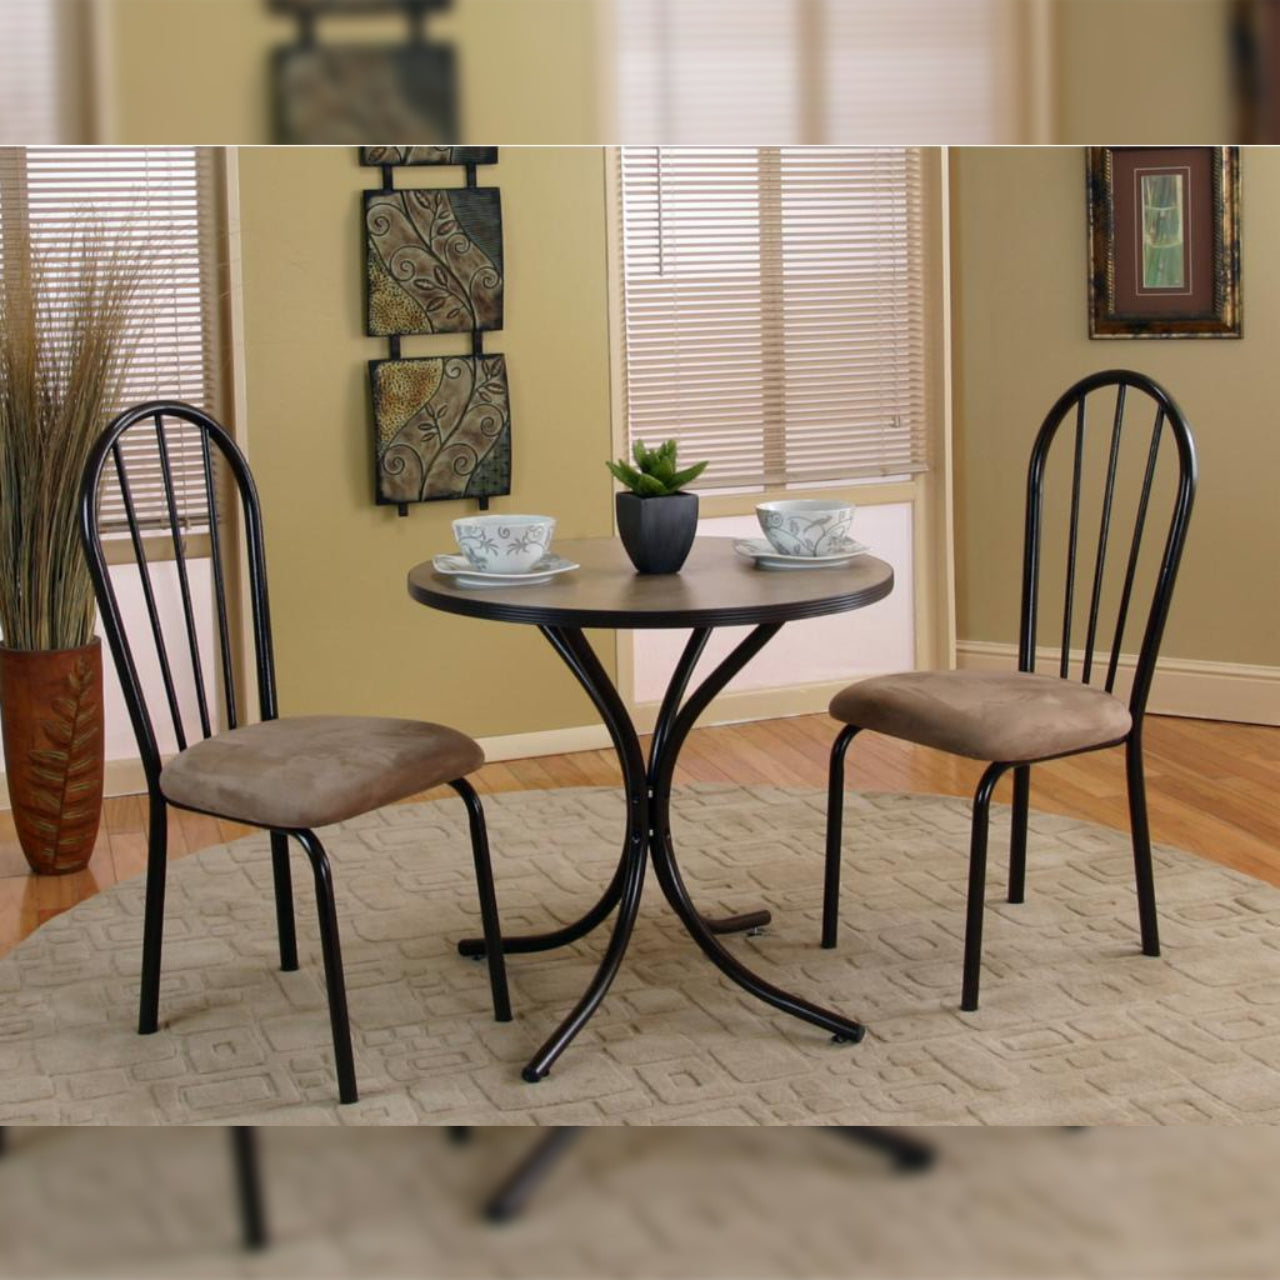 Dining Set 3 Piece Dining Table with 2 Chairs